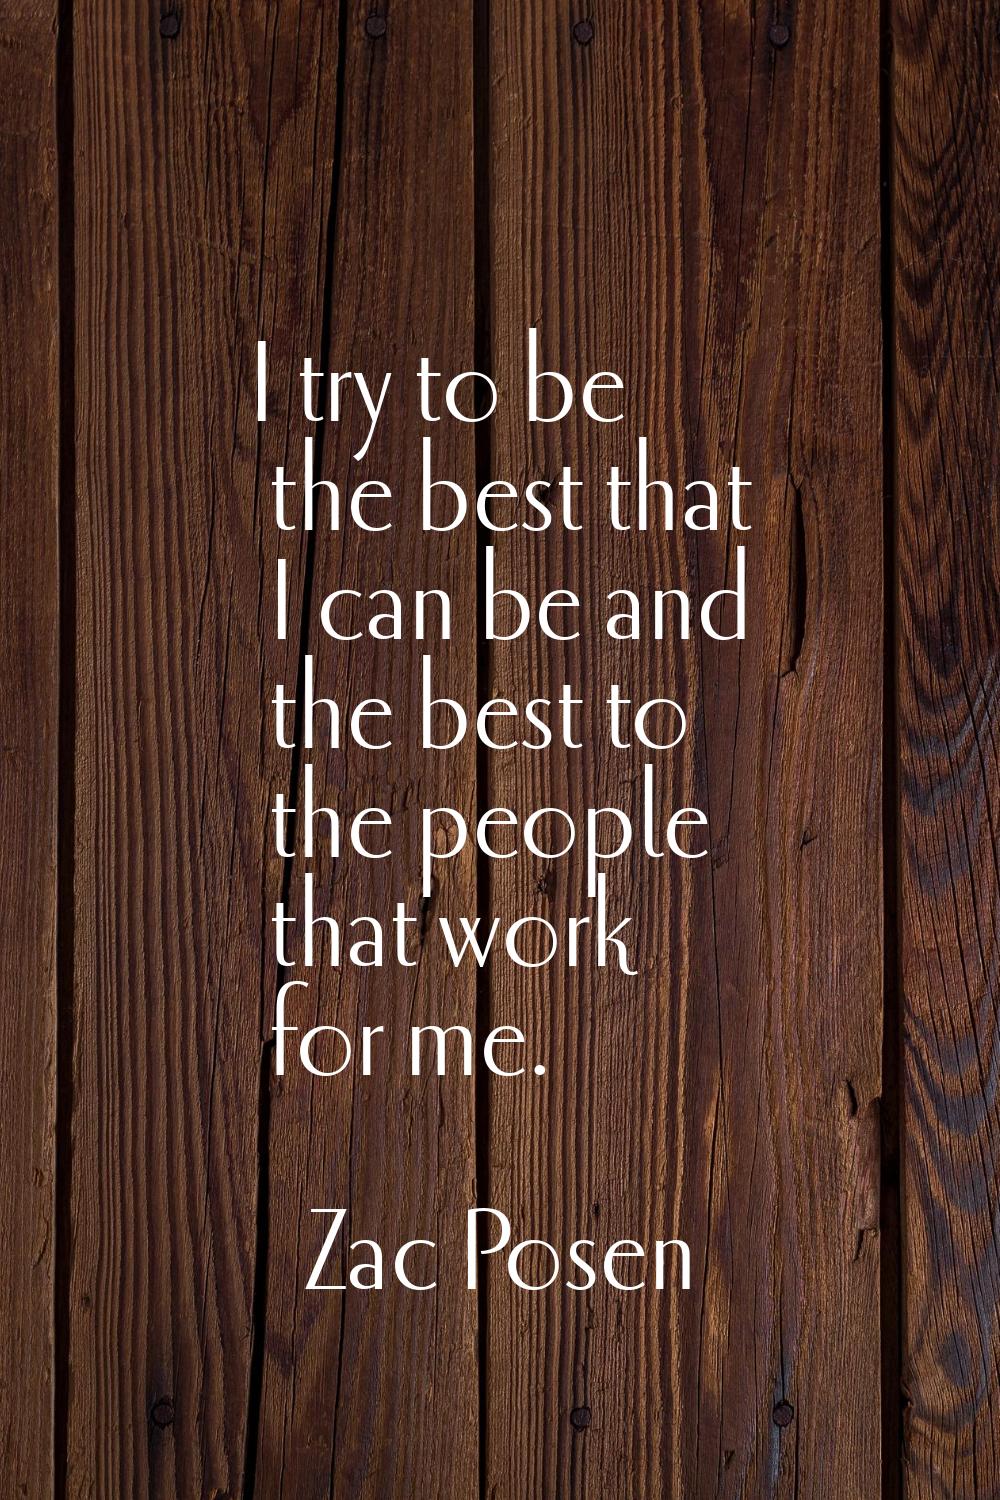 I try to be the best that I can be and the best to the people that work for me.